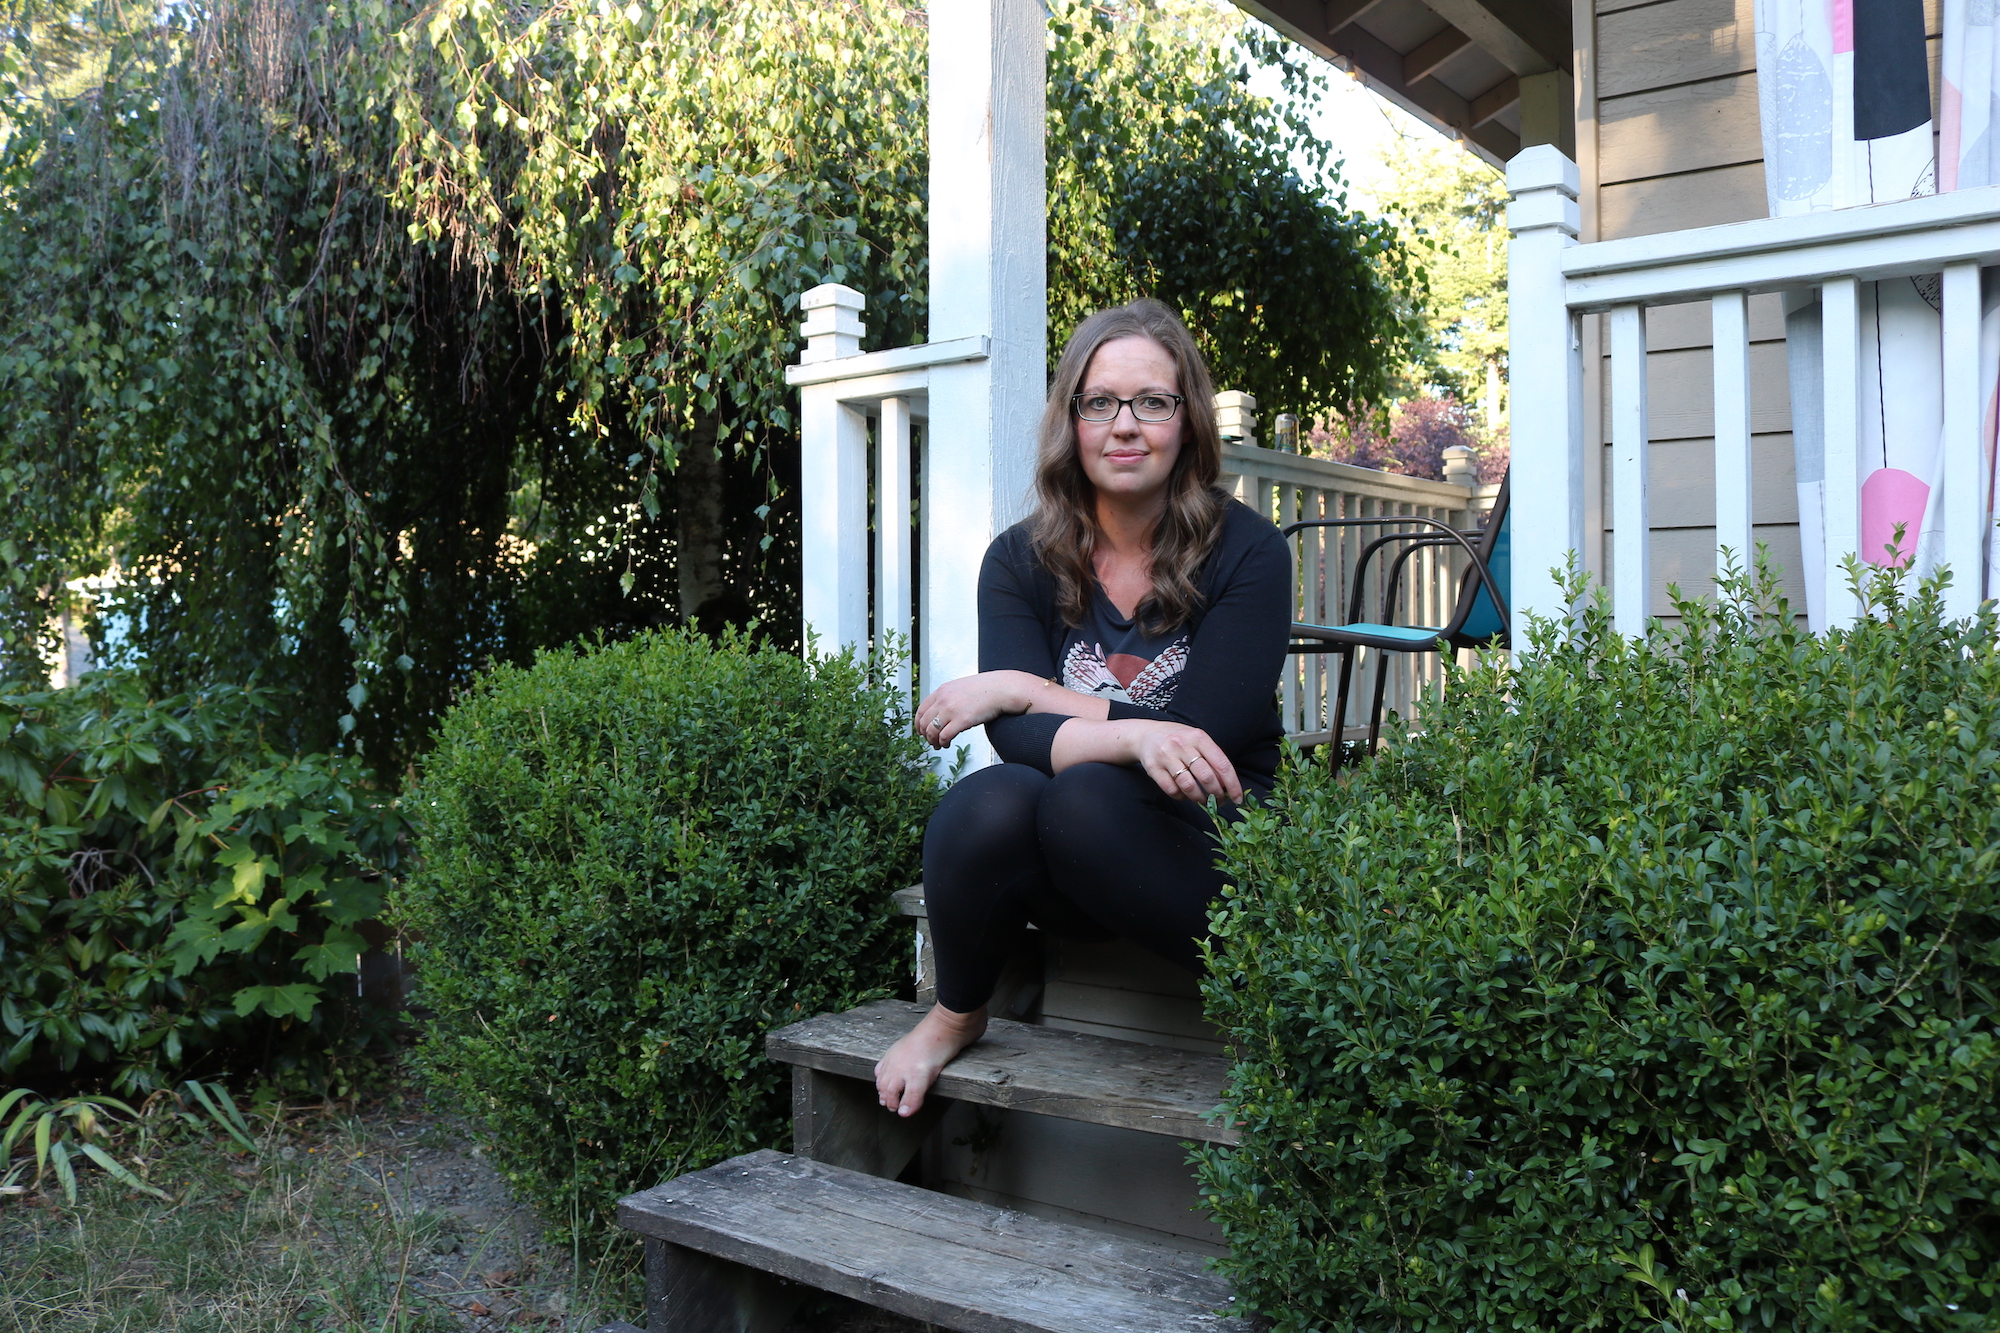 a woman sits on the steps of a houe with white trim surrounded by green bushes